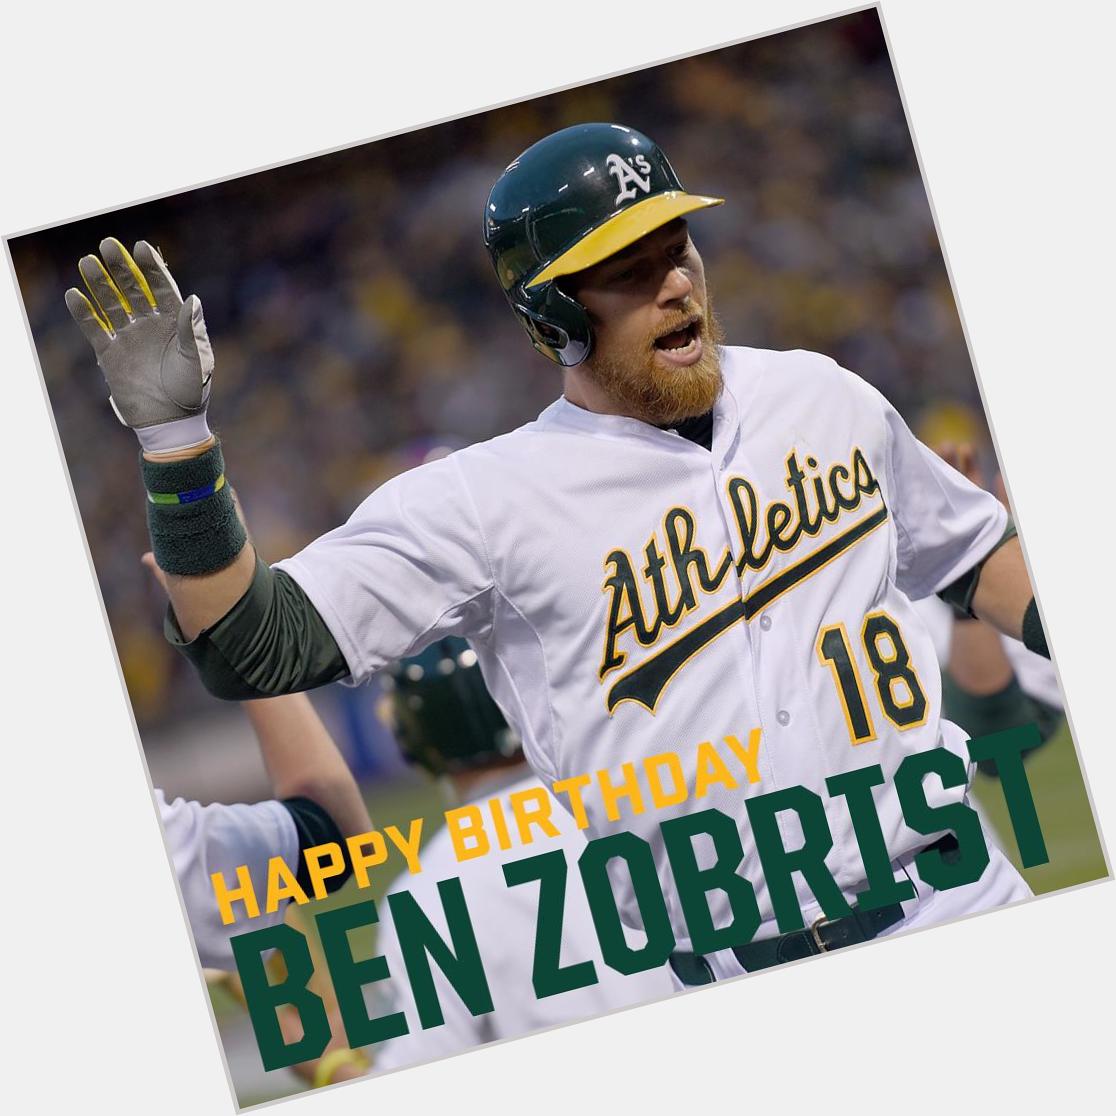 Happy Birthday to number 18, Ben Zobrist! to wish him a good one. 